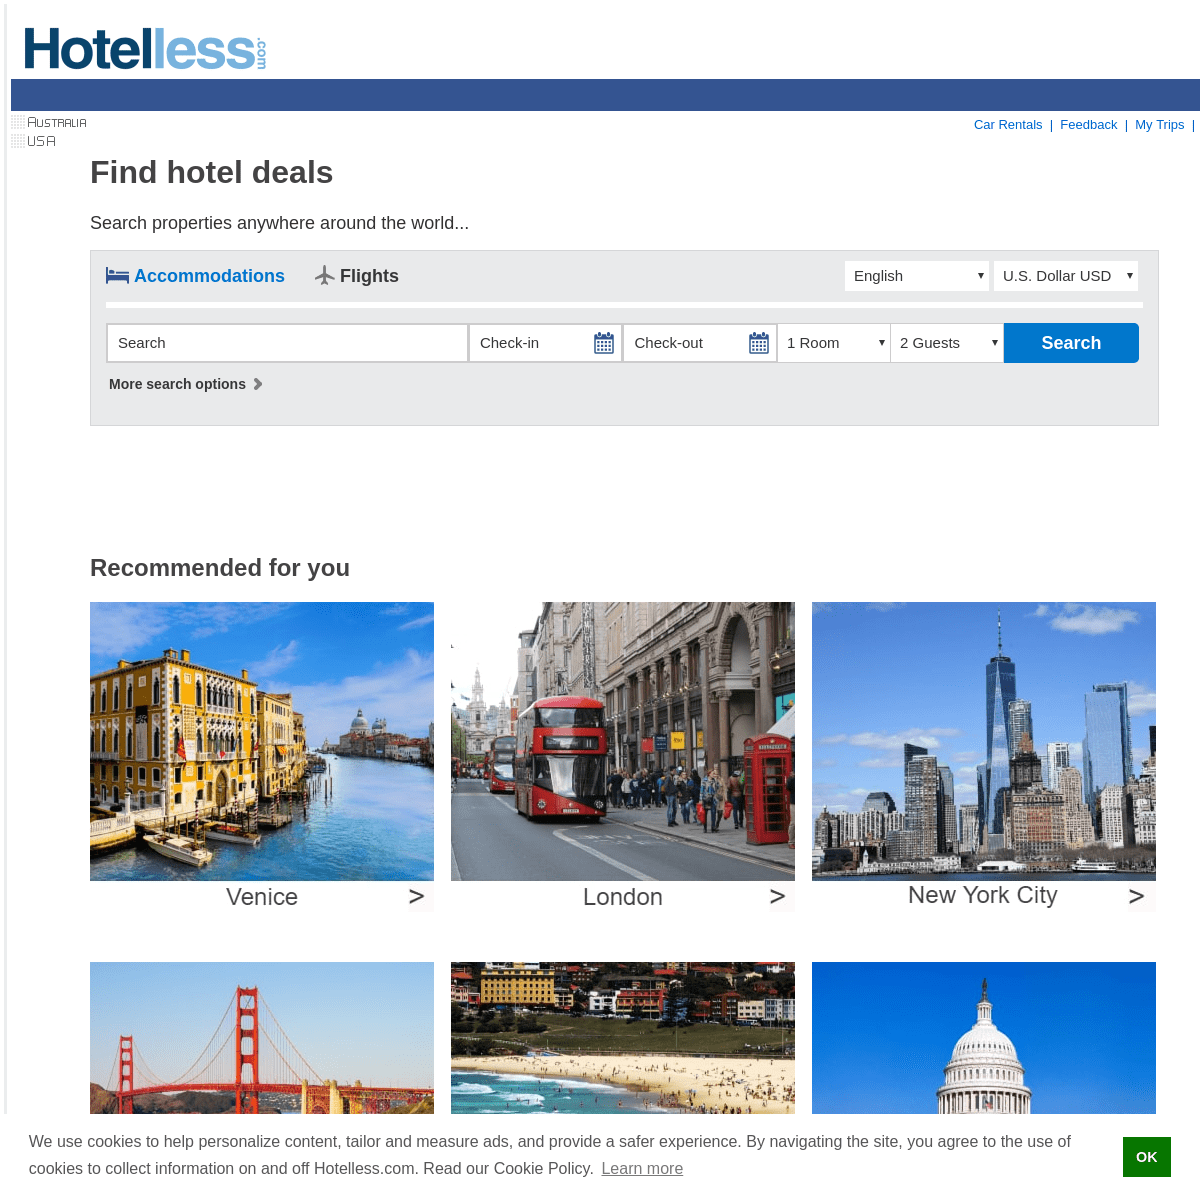 Hotels: Cheap Hotel Deals, Biggest Selection, Compare Best Prices